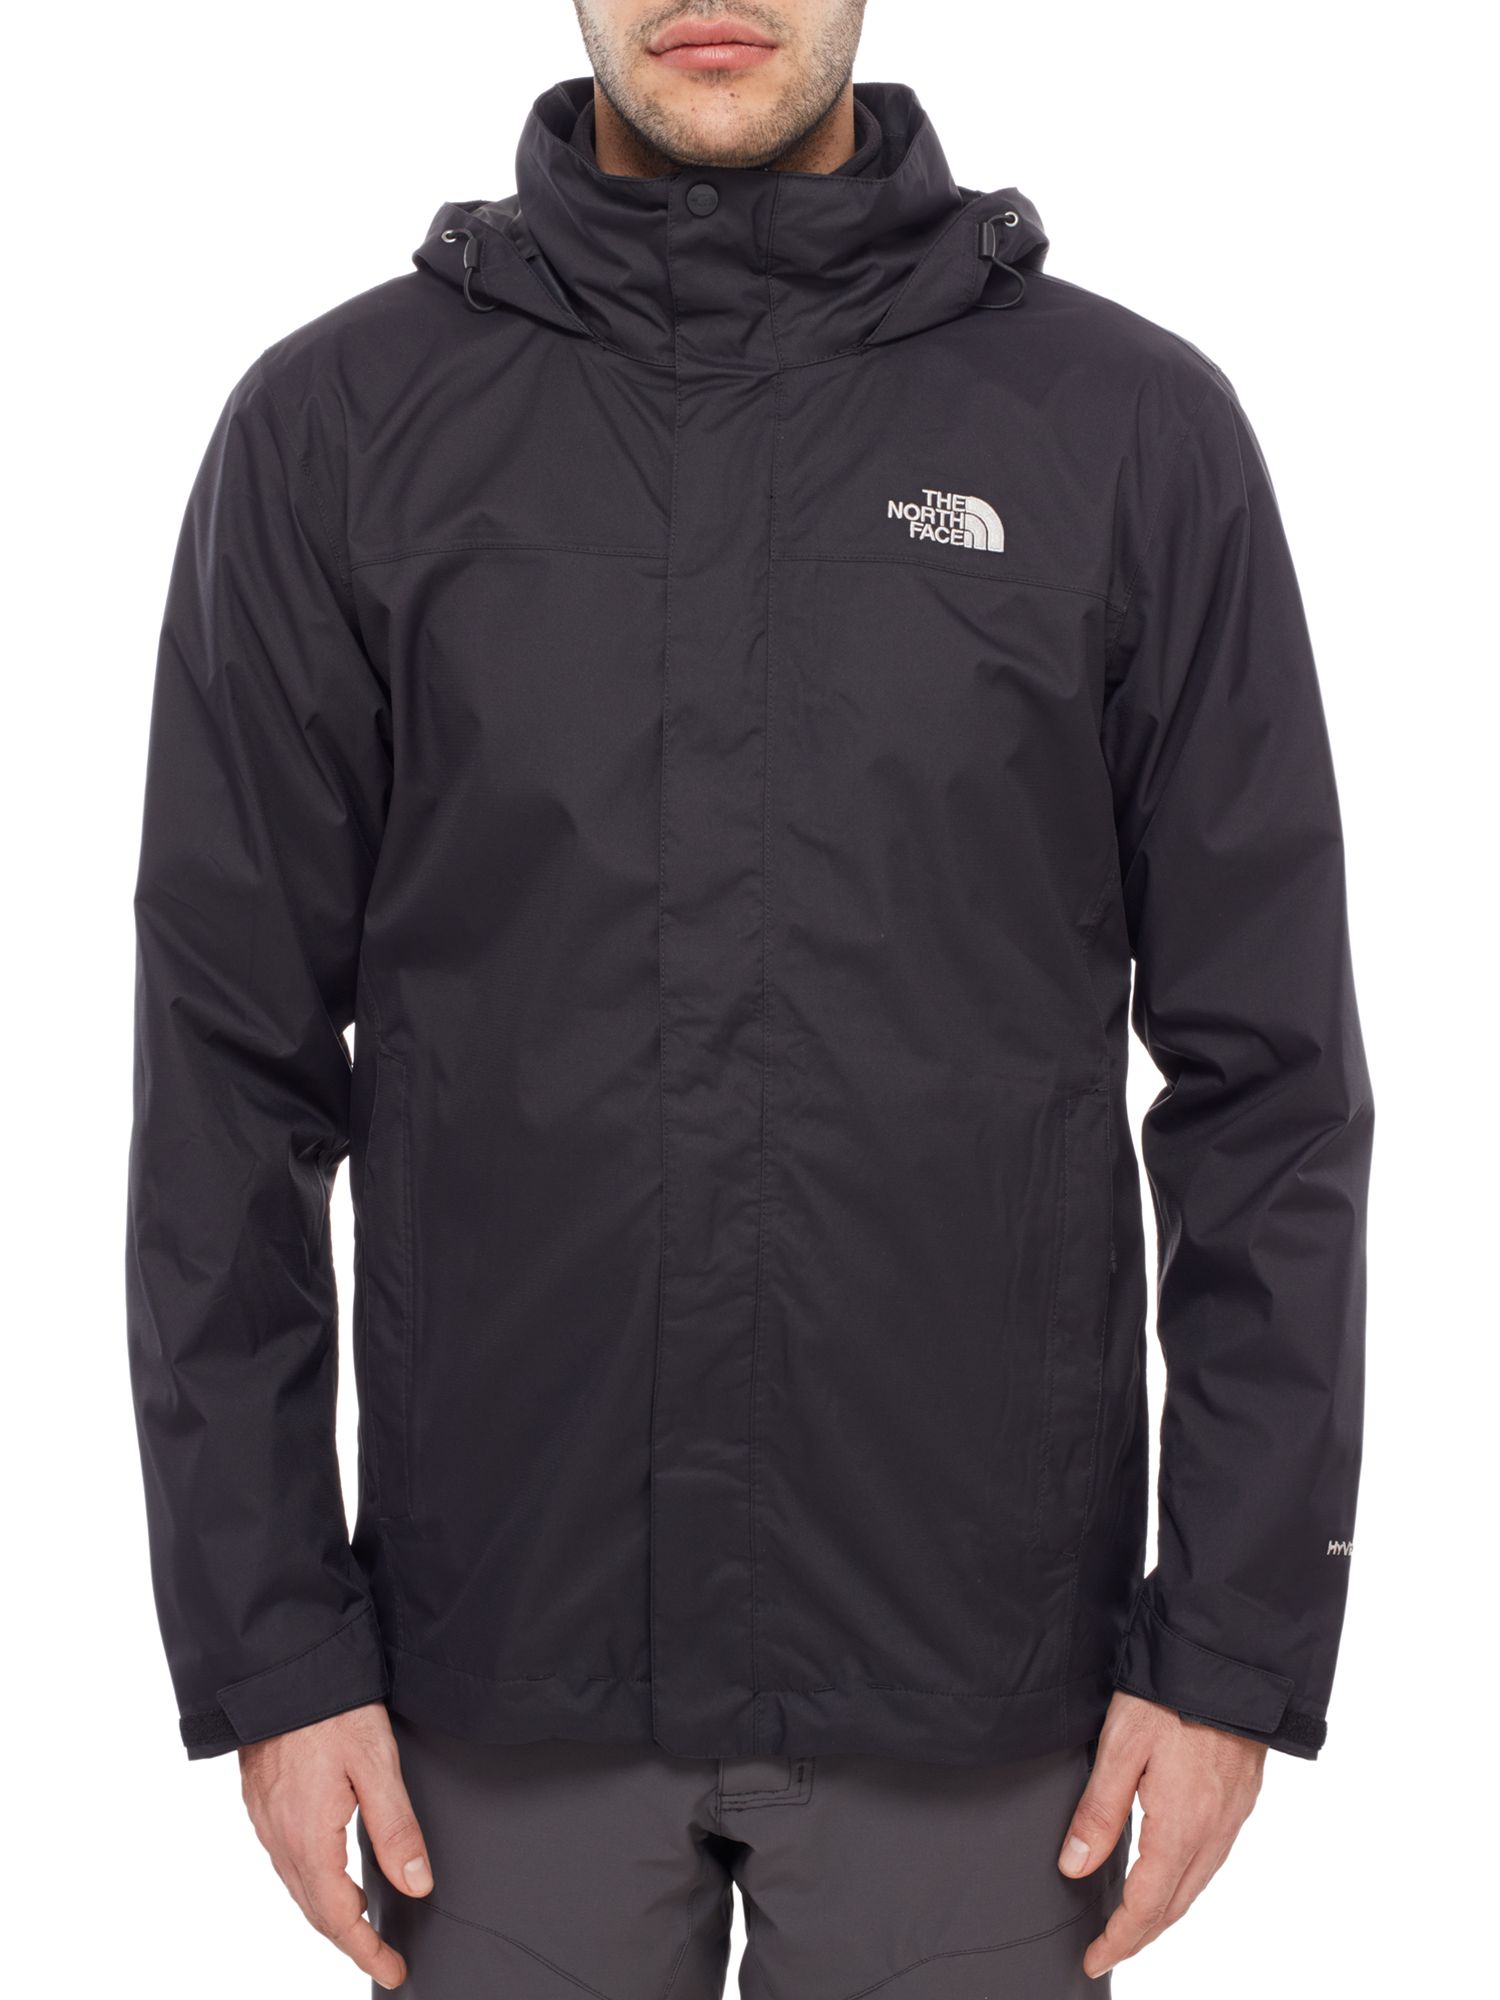 hyvent the north face 